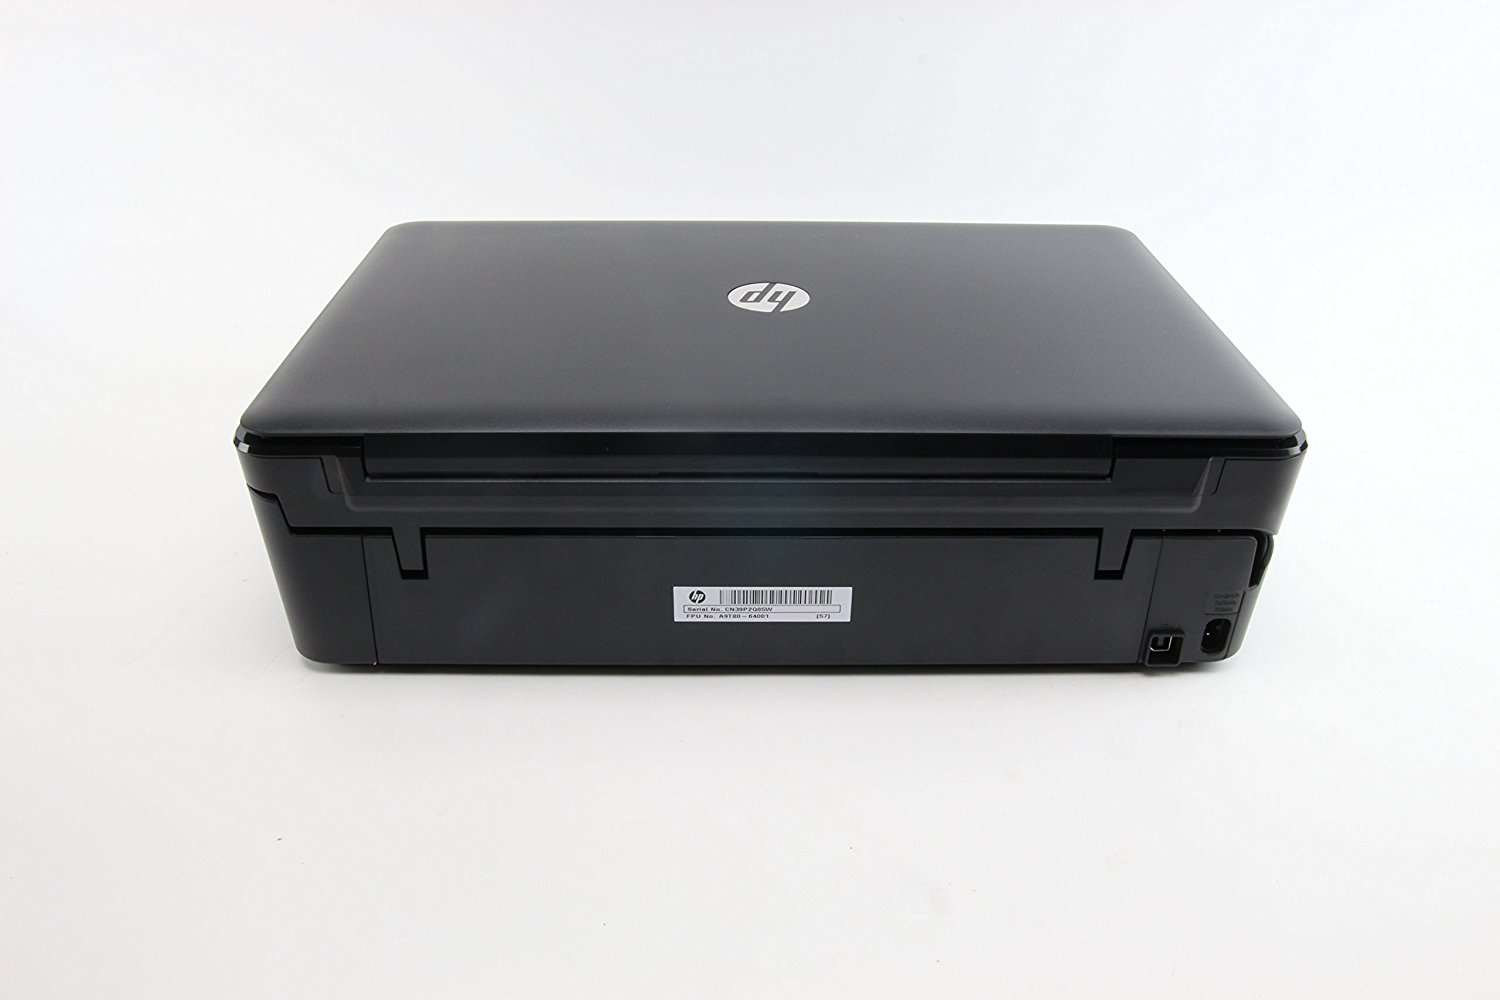 Hp Envy 4504 Network Ready Wireless E All In One Printer N3 Free Image Download 2564